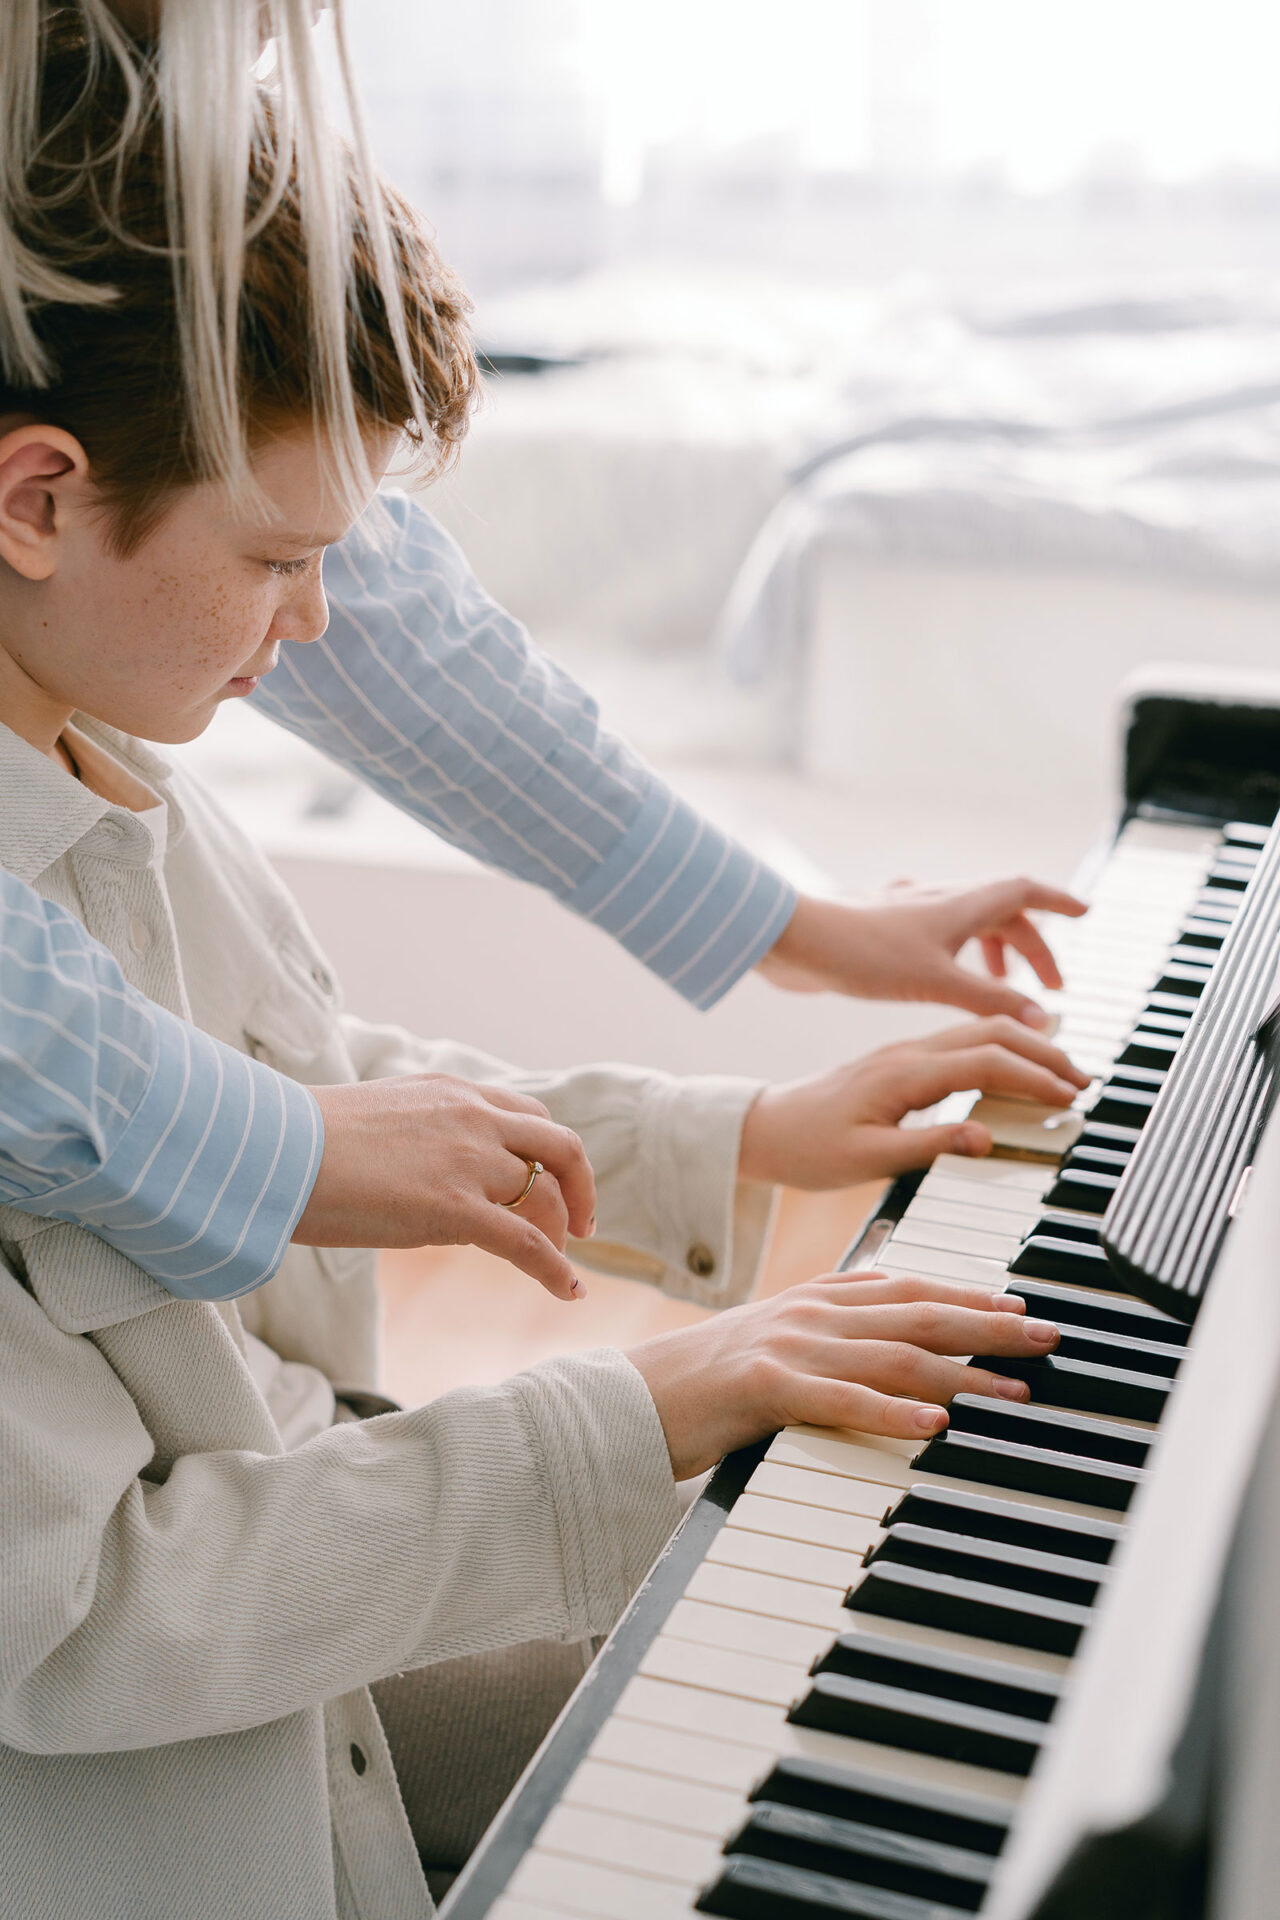 Teaching a child to learn piano